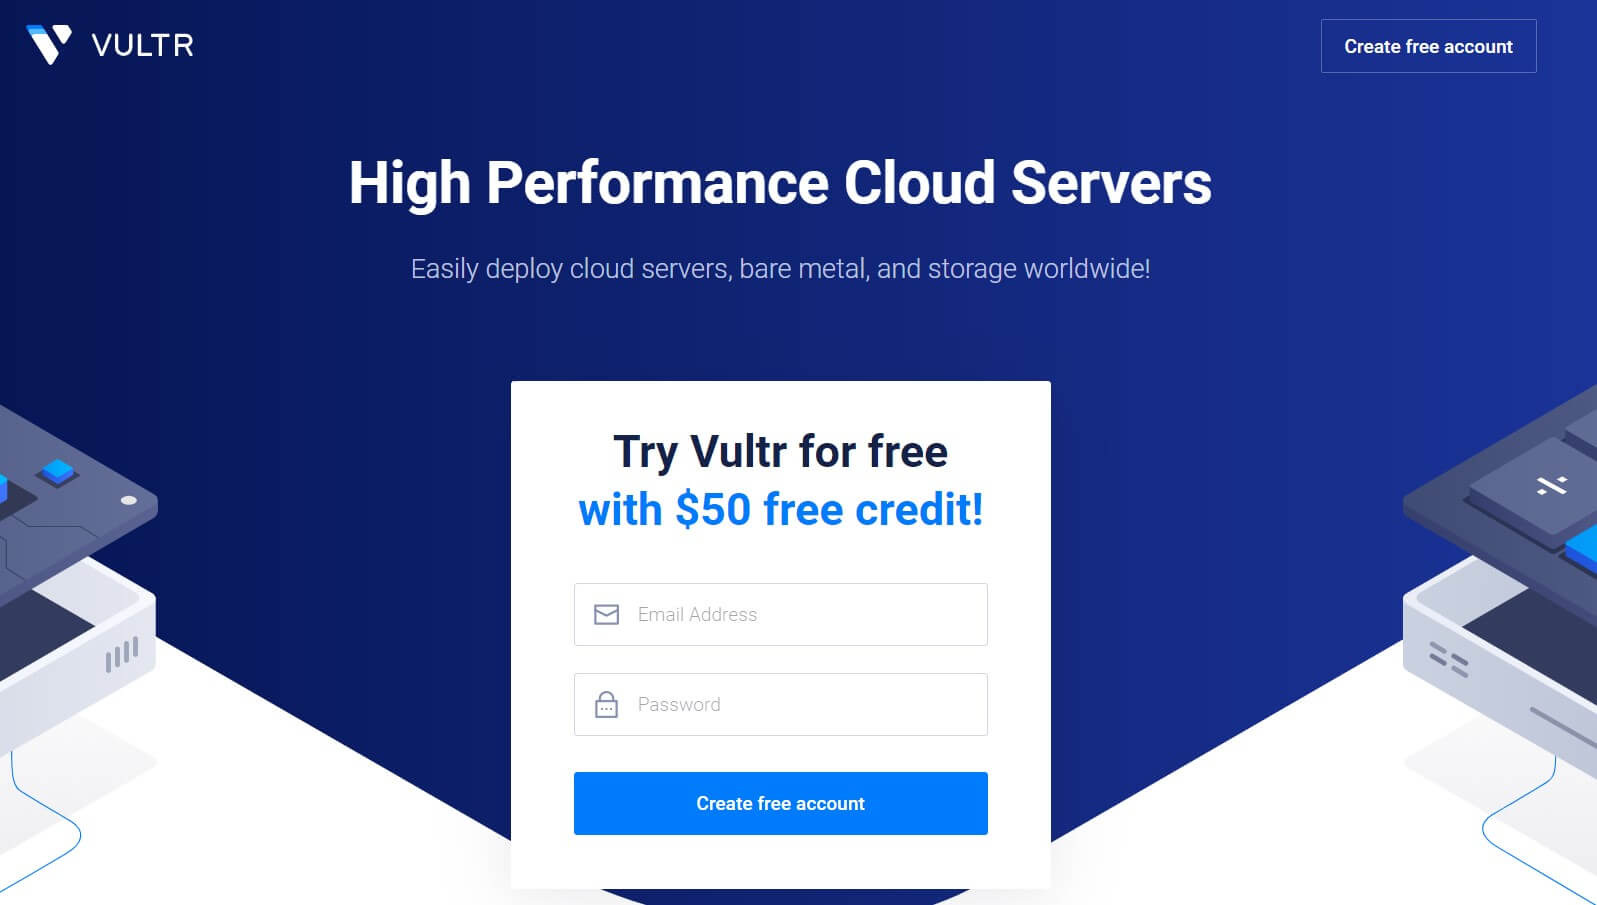 Try Vultr for free with $50 free credit!